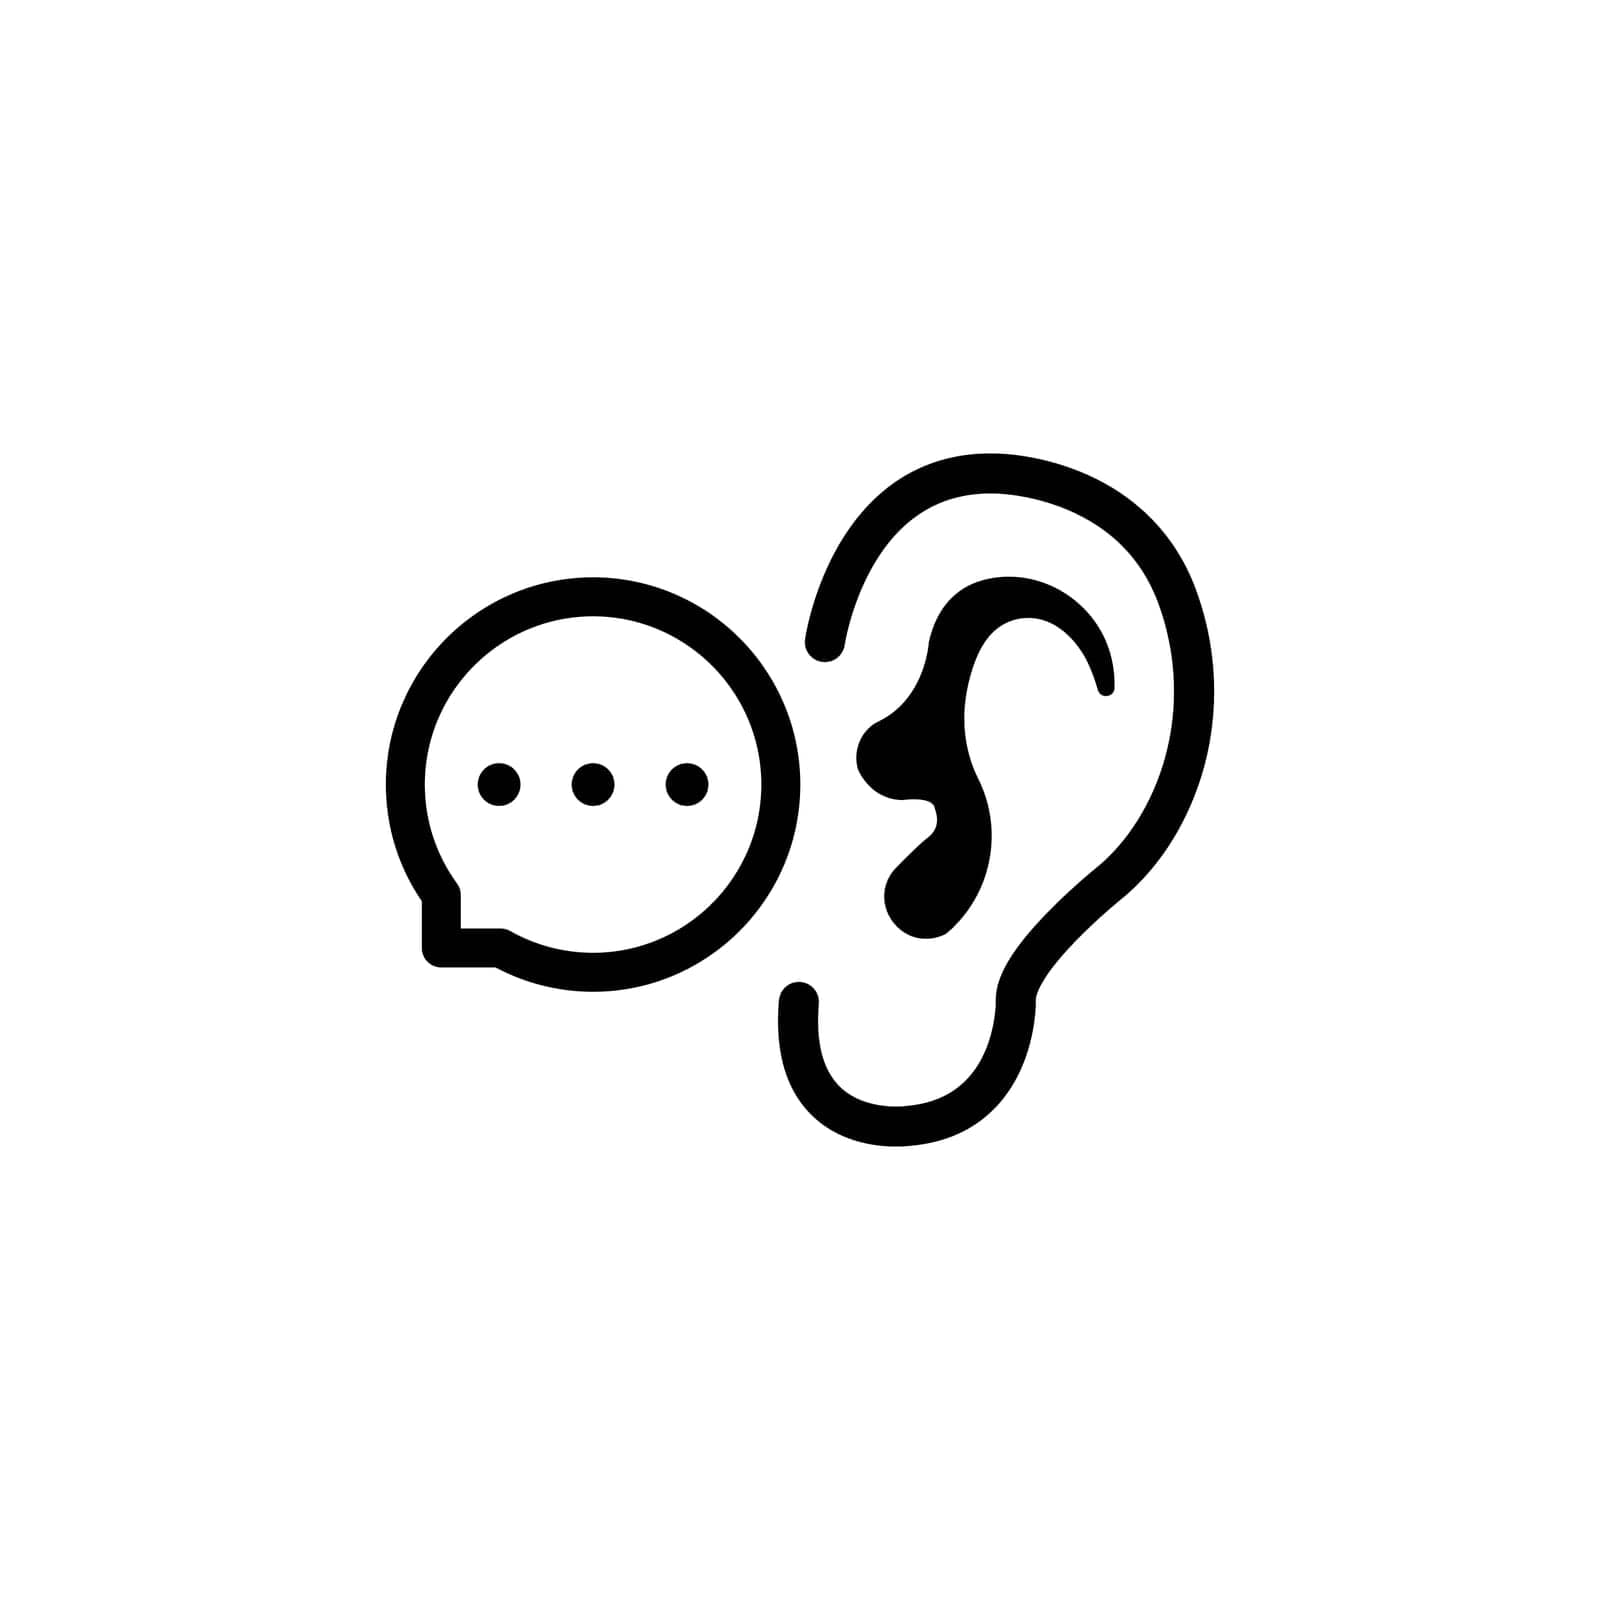 Speech bubble with whisper in ear. concept of easy rumors spread and impact on the listener. flat linear simple style trend modern minimal logotype graphic art design isolated on white background